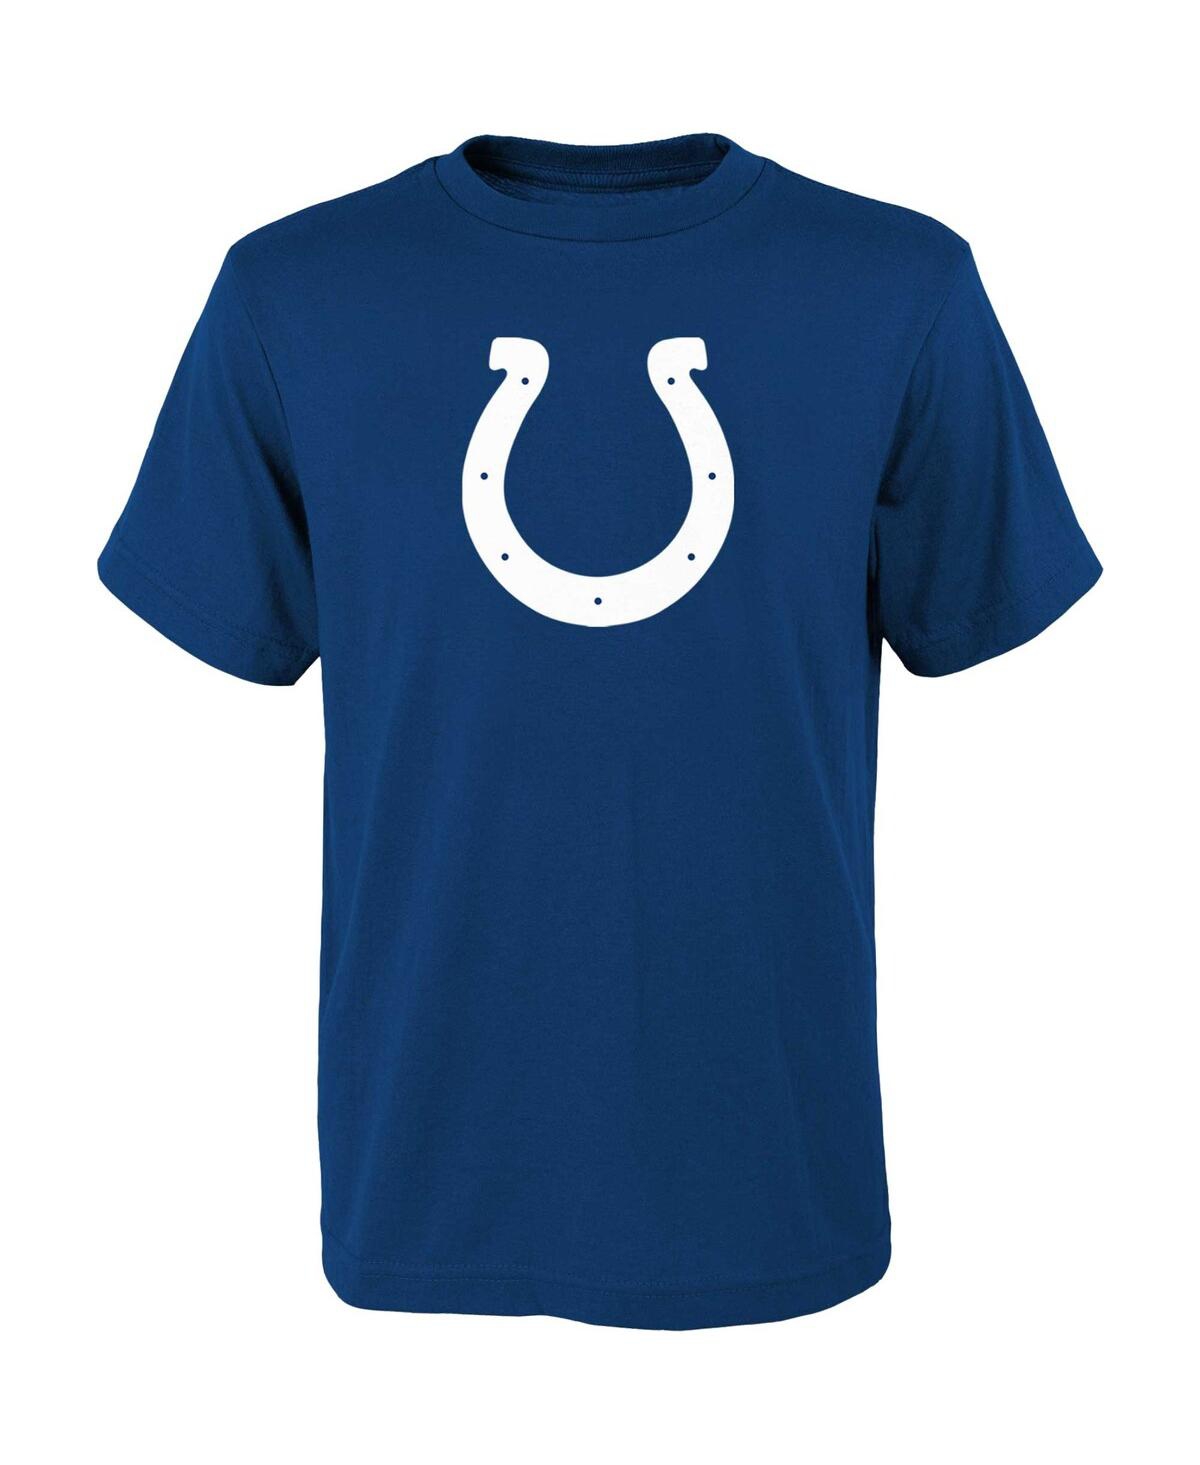 Outerstuff Kids' Big Boys Royal Indianapolis Colts Primary Logo T-shirt